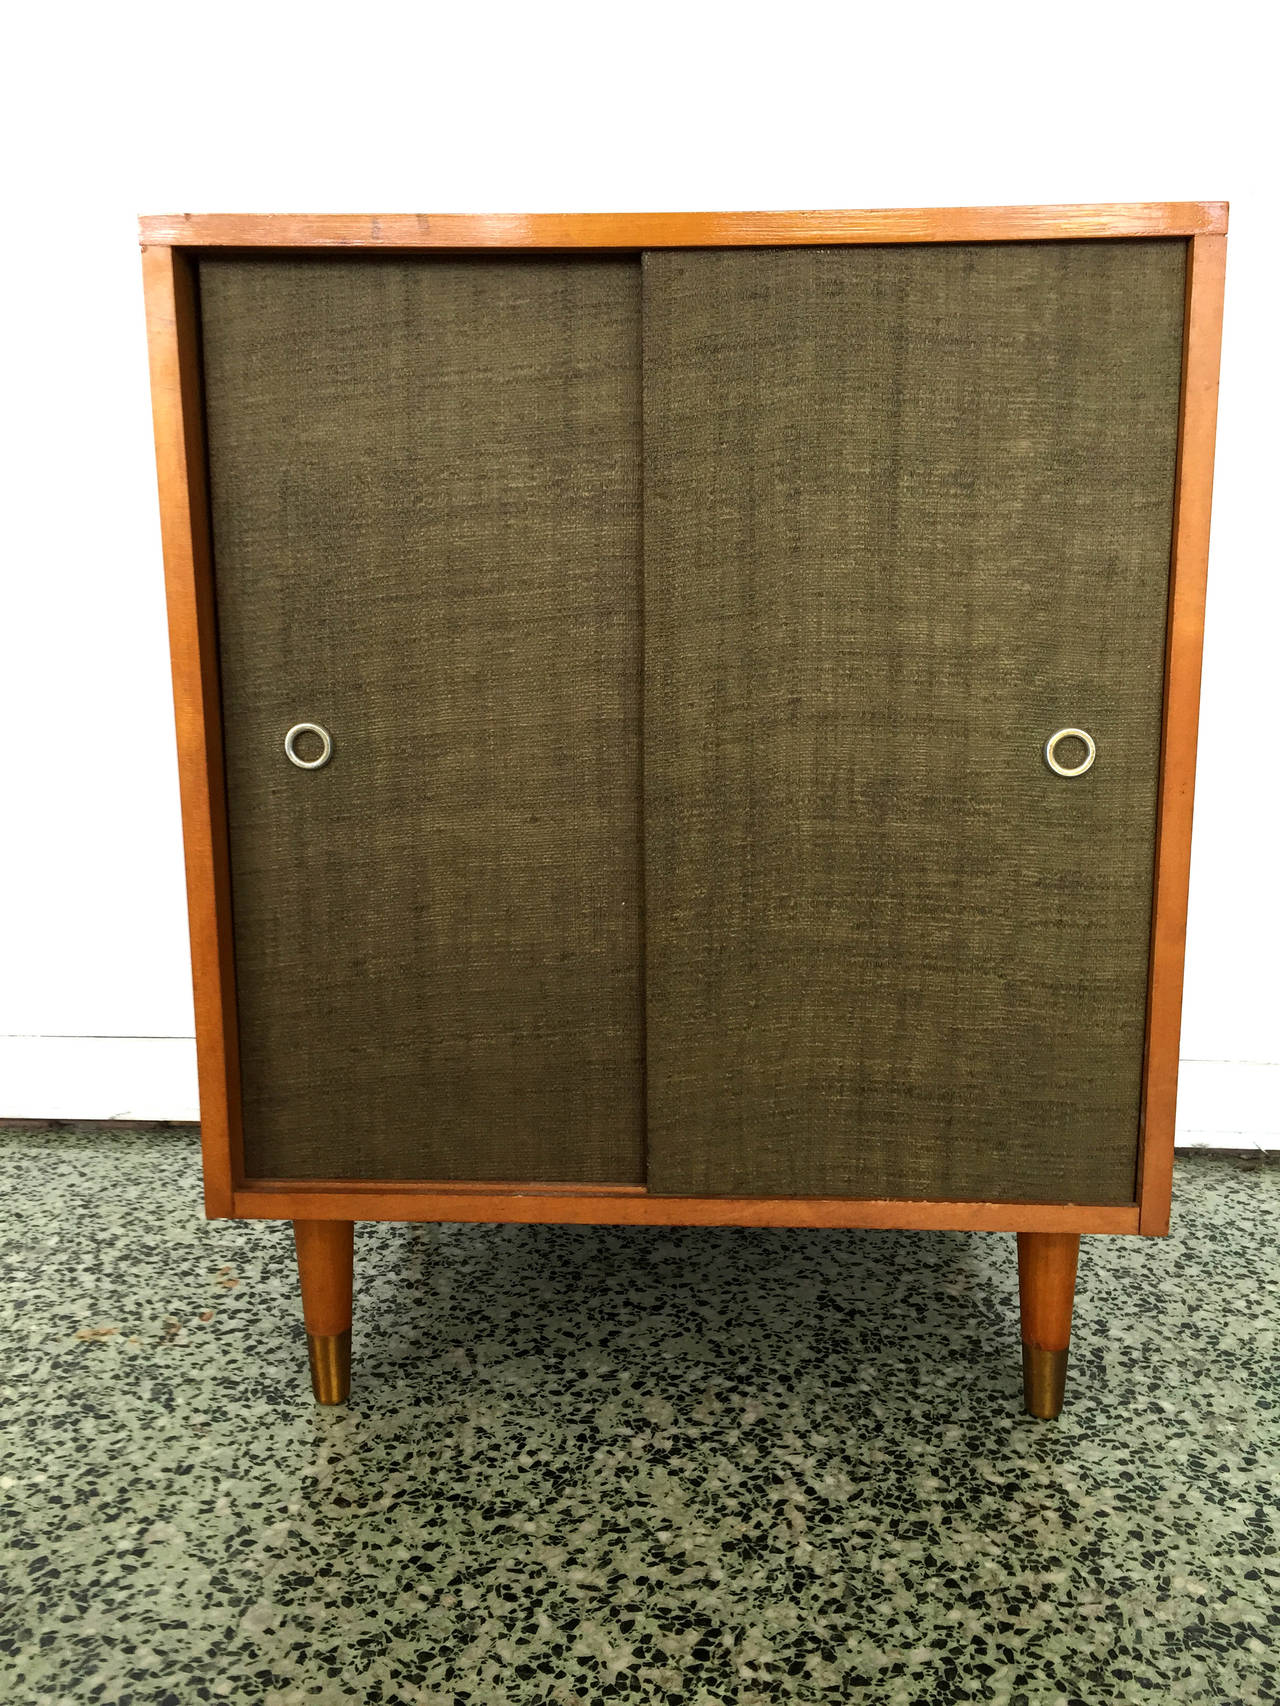 Grass cloth sliding door cabinet by Paul McCobb for Winchendon.